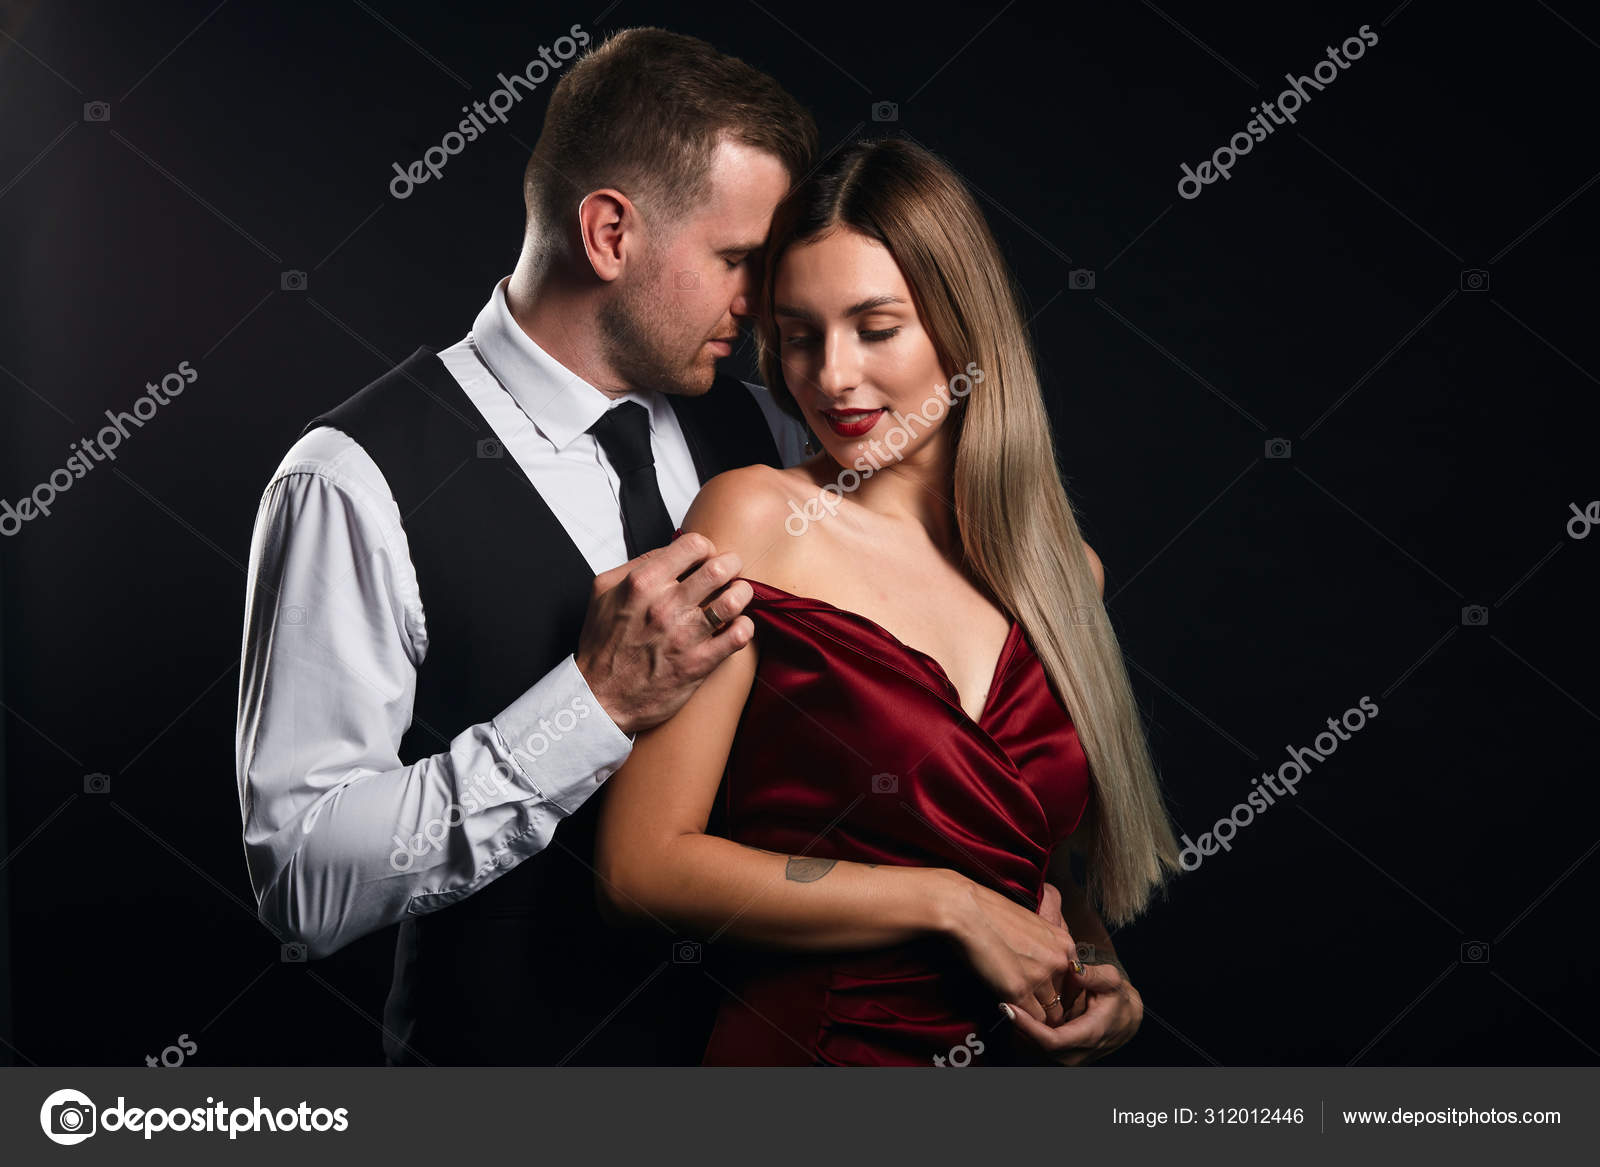 Beautiful blonde woman undressed by her boyfriend Stock Photo by ©1greyday 312012446